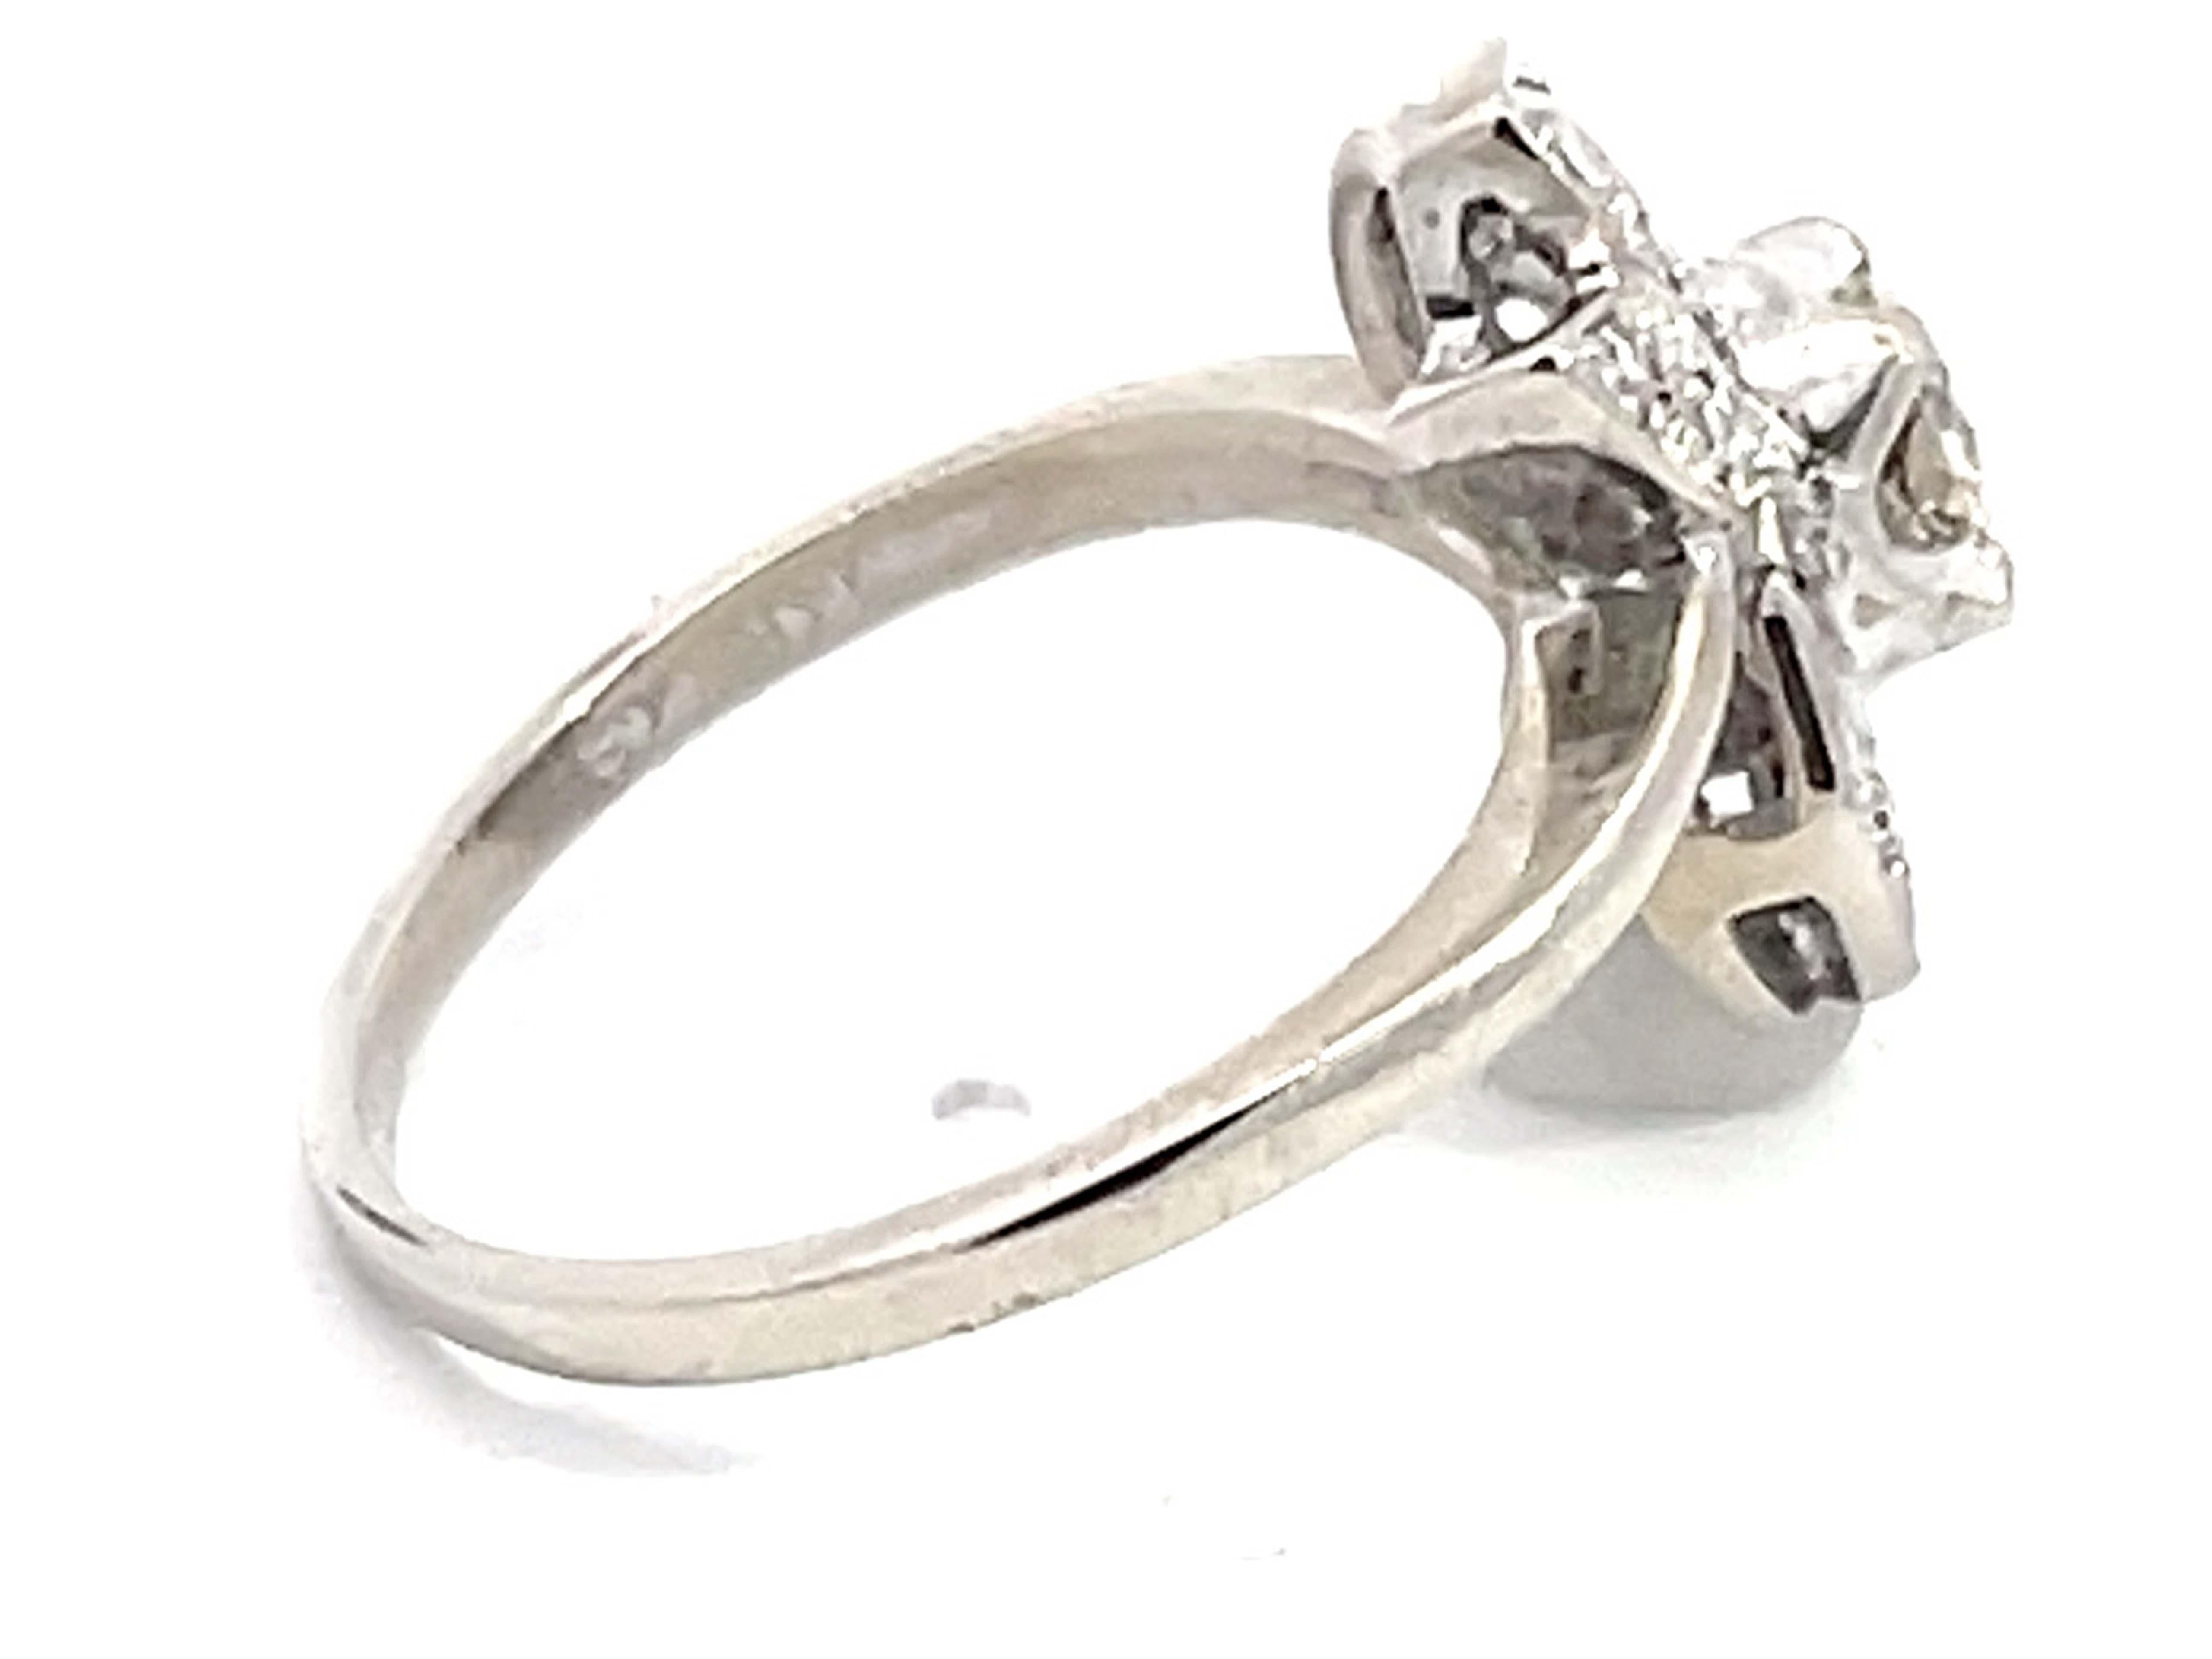 Vintage Transition Cut Diamond Ring in 14k White Gold In Excellent Condition For Sale In Honolulu, HI